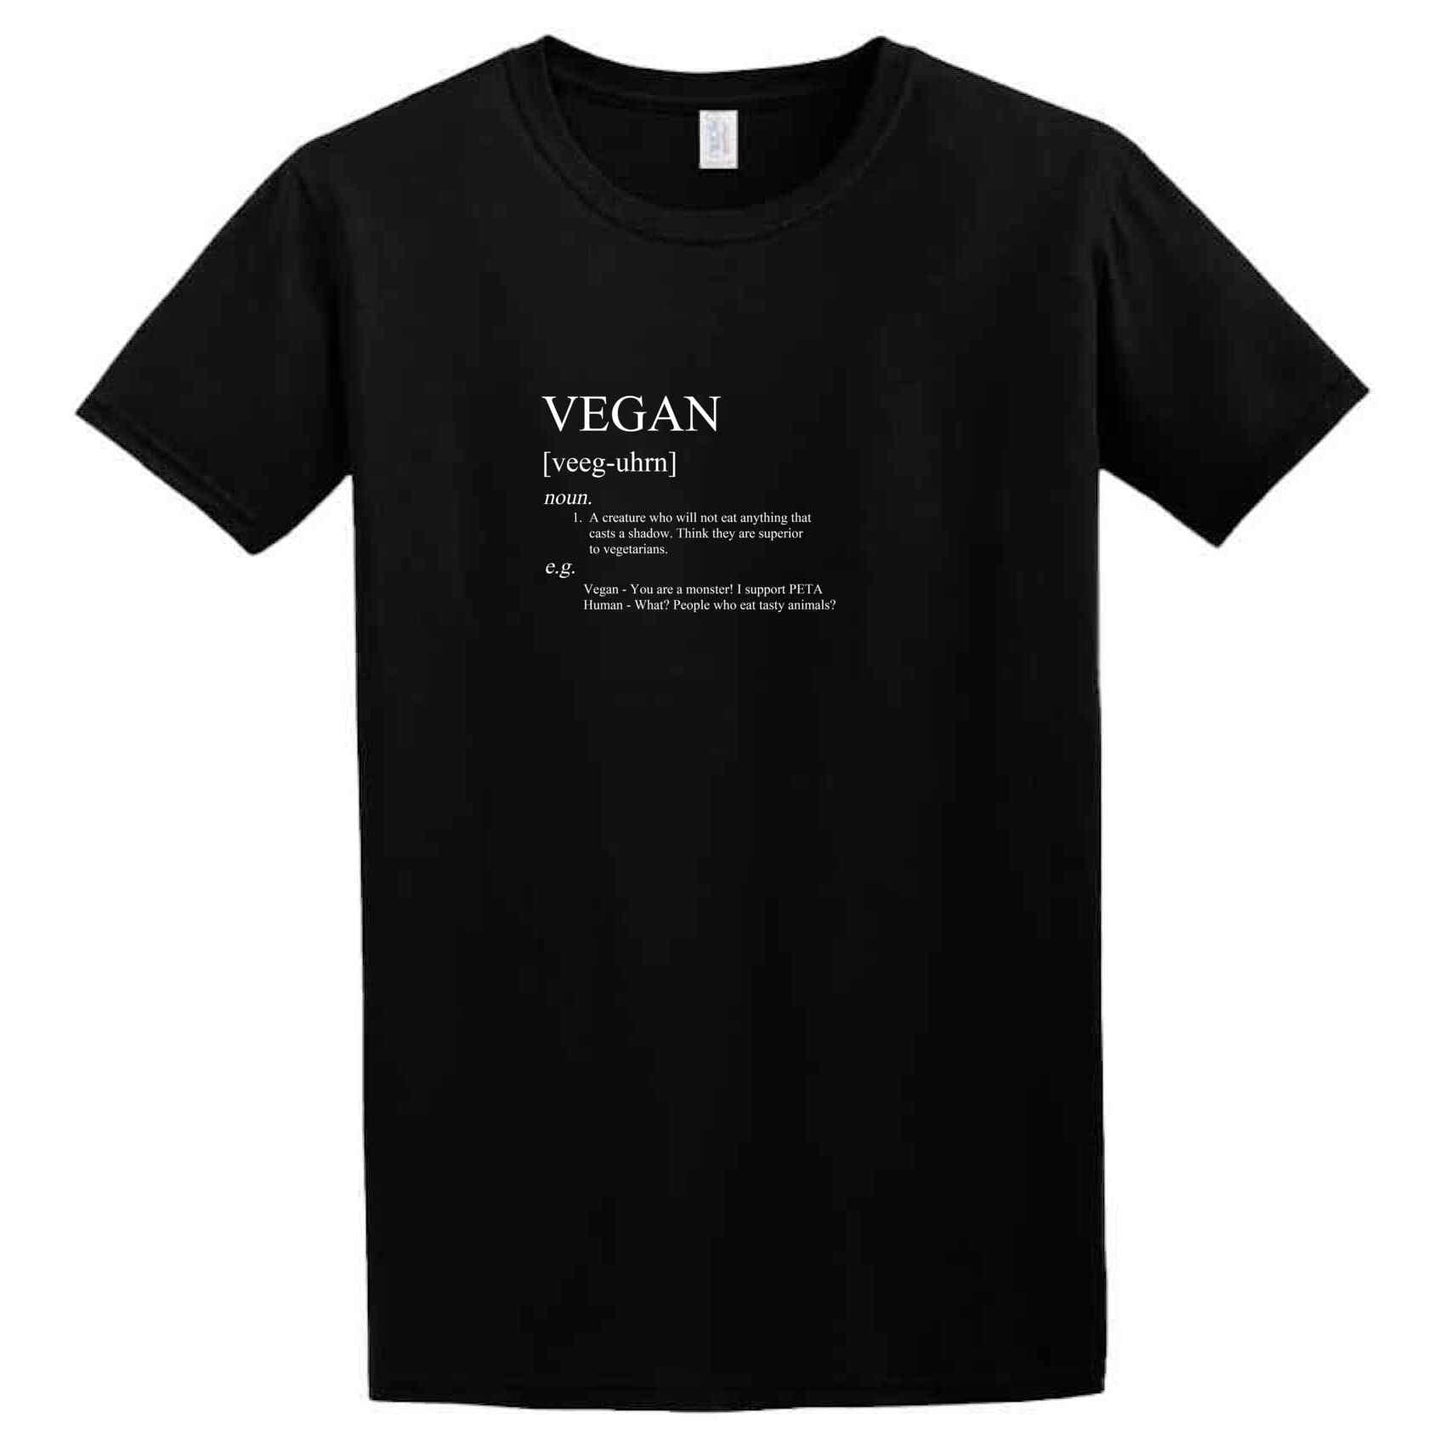 A black Vegan T-Shirt that says vegan by Twisted Gifts.